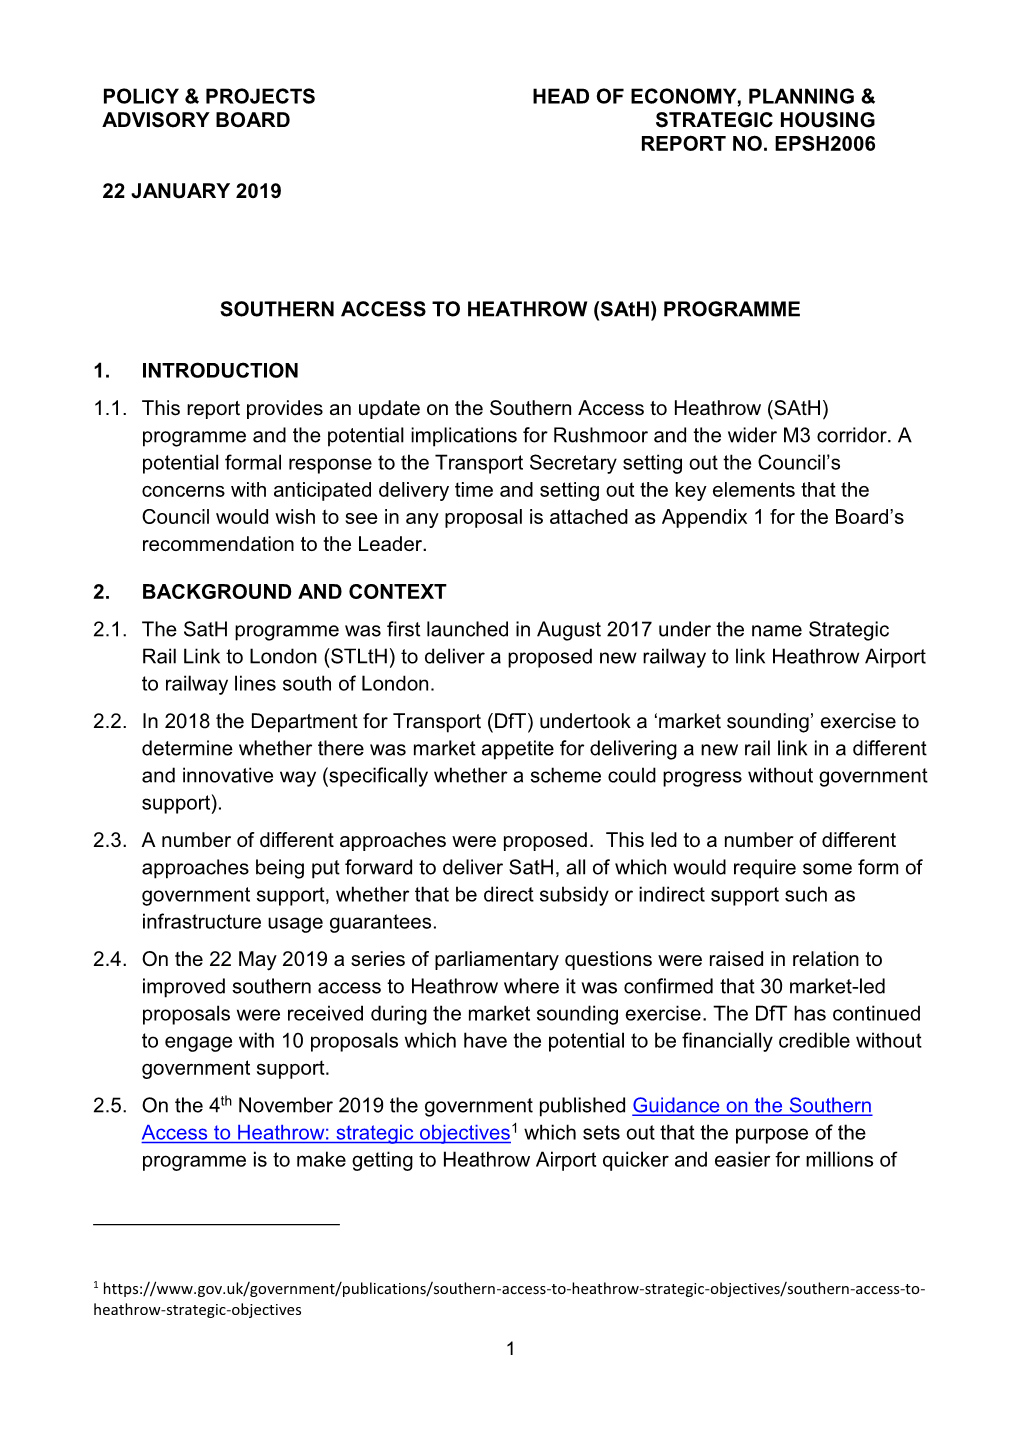 SOUTHERN ACCESS to HEATHROW (Sath) PROGRAMME